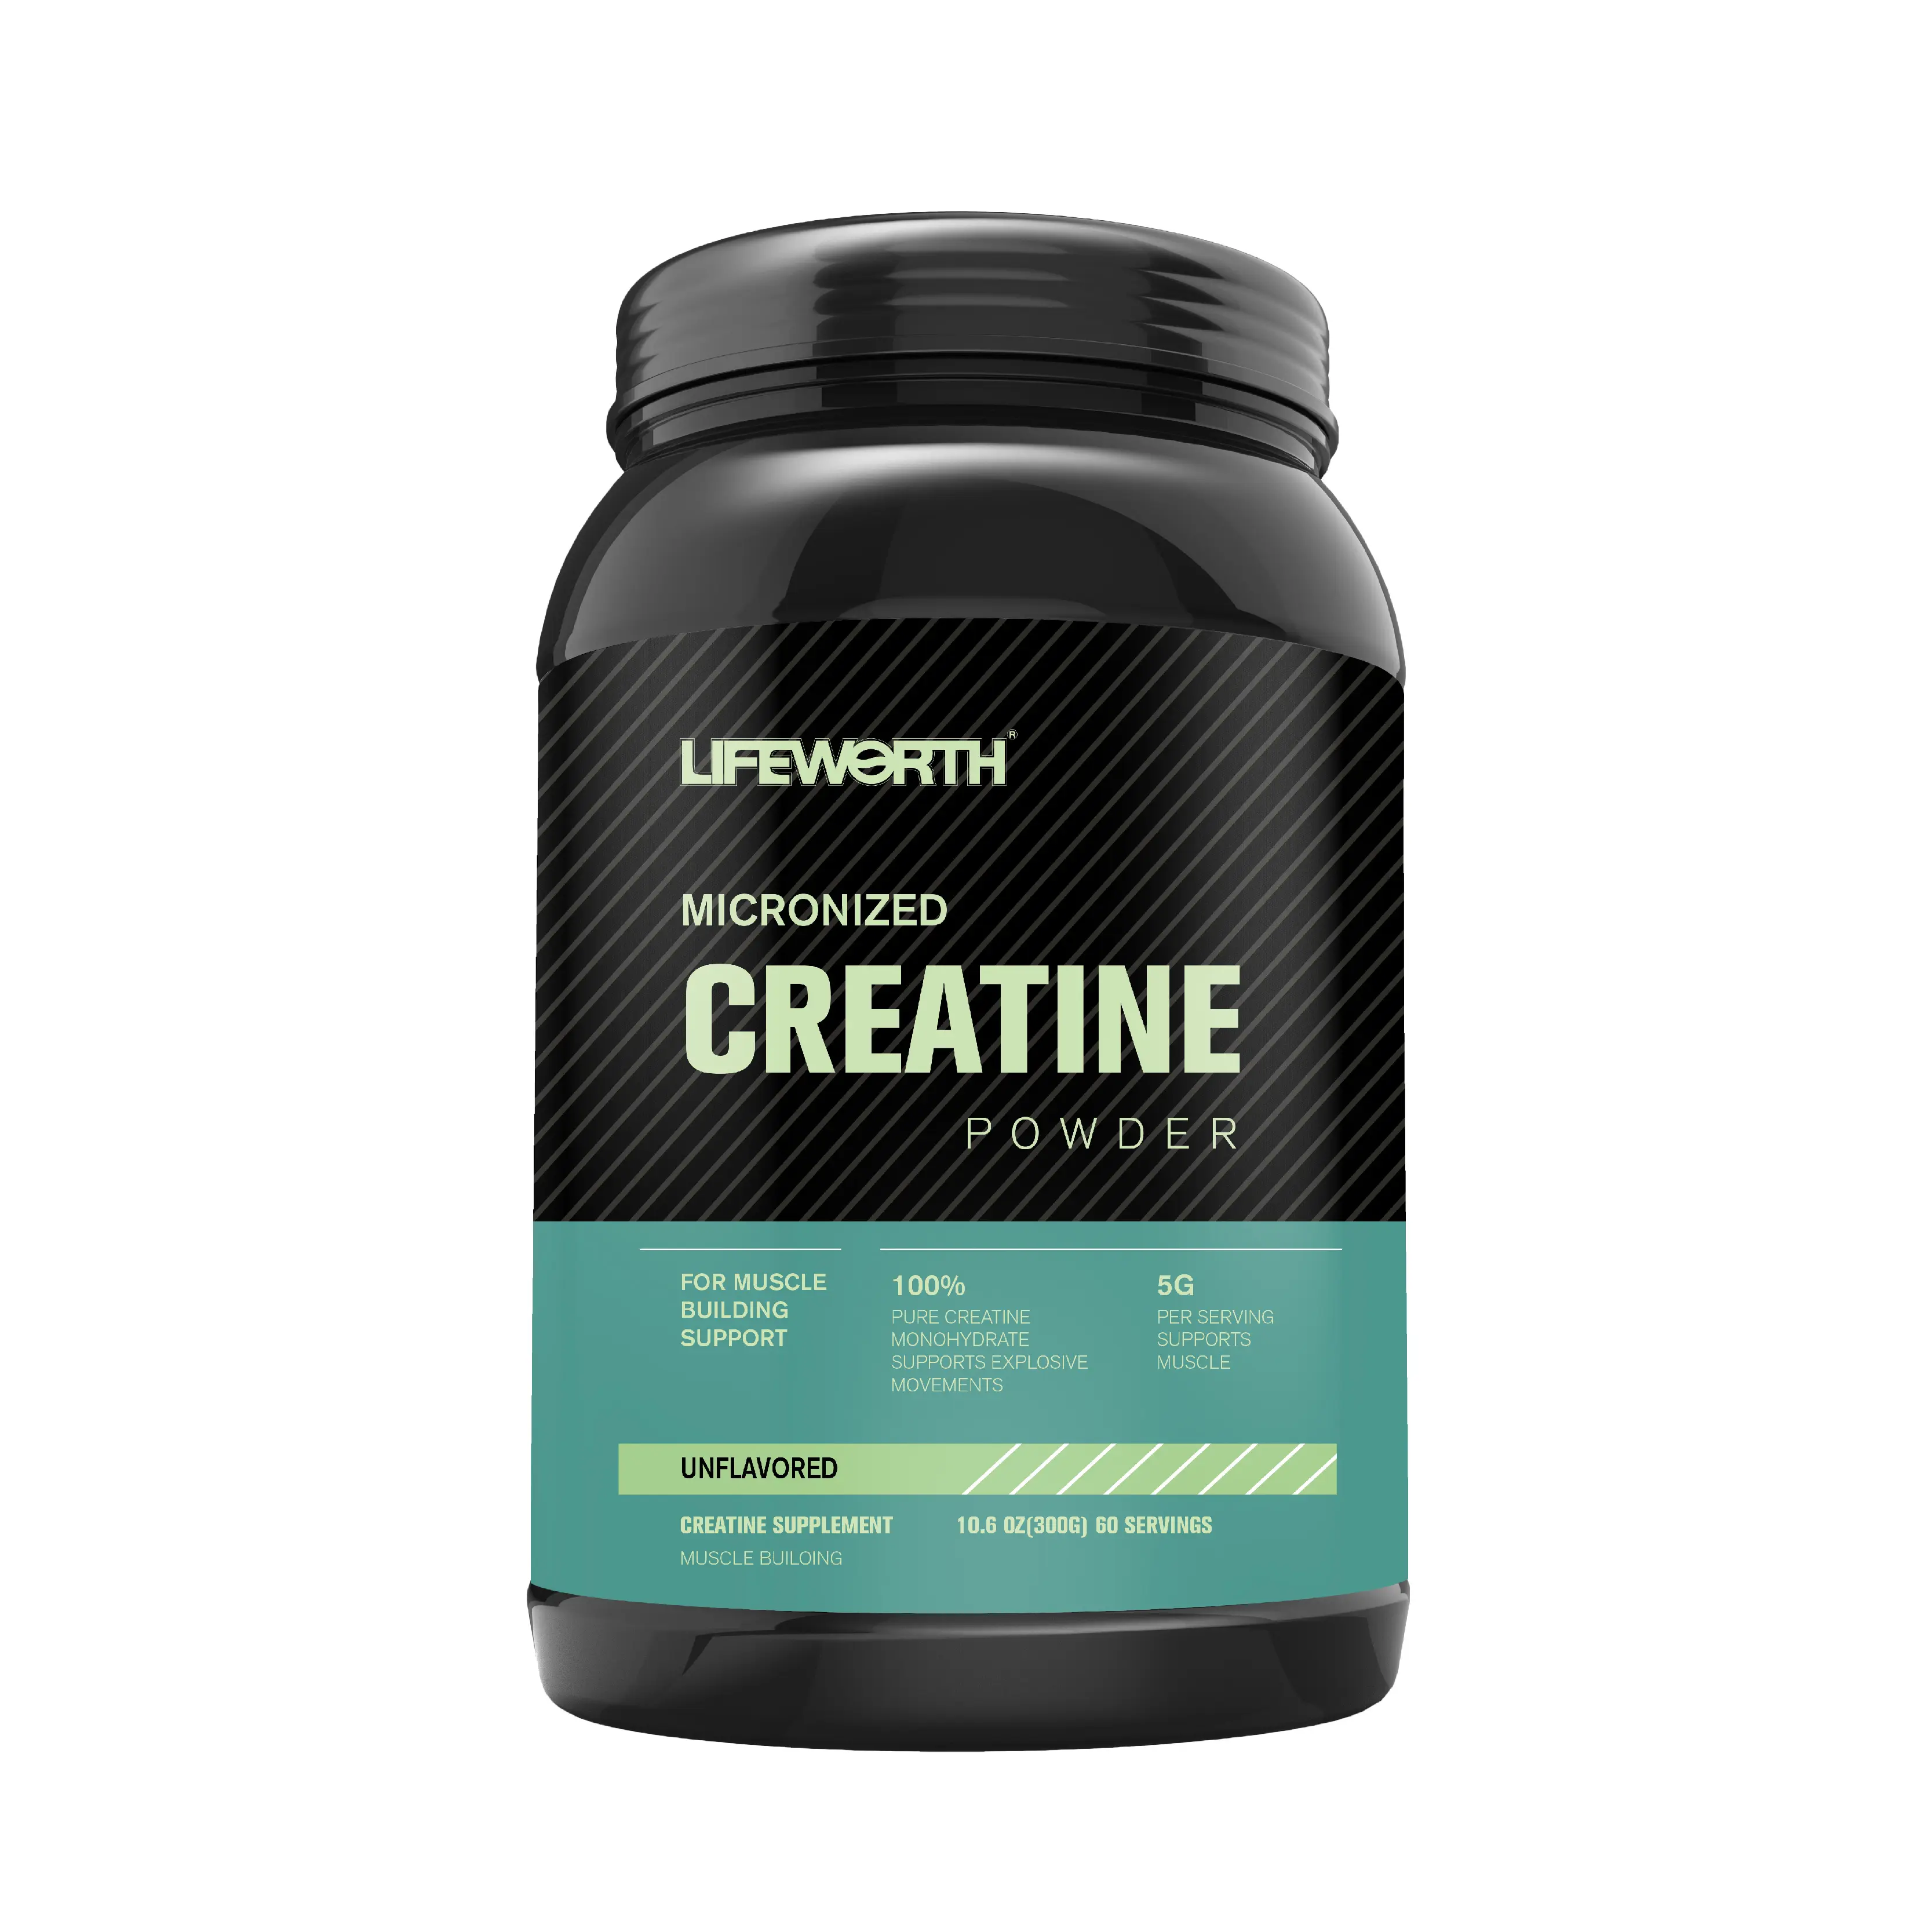 LIFEWORTH Customized Nutrition Supplements Unflavored Fruits Flavored Creatine Monohydrate Energy Drink Powder